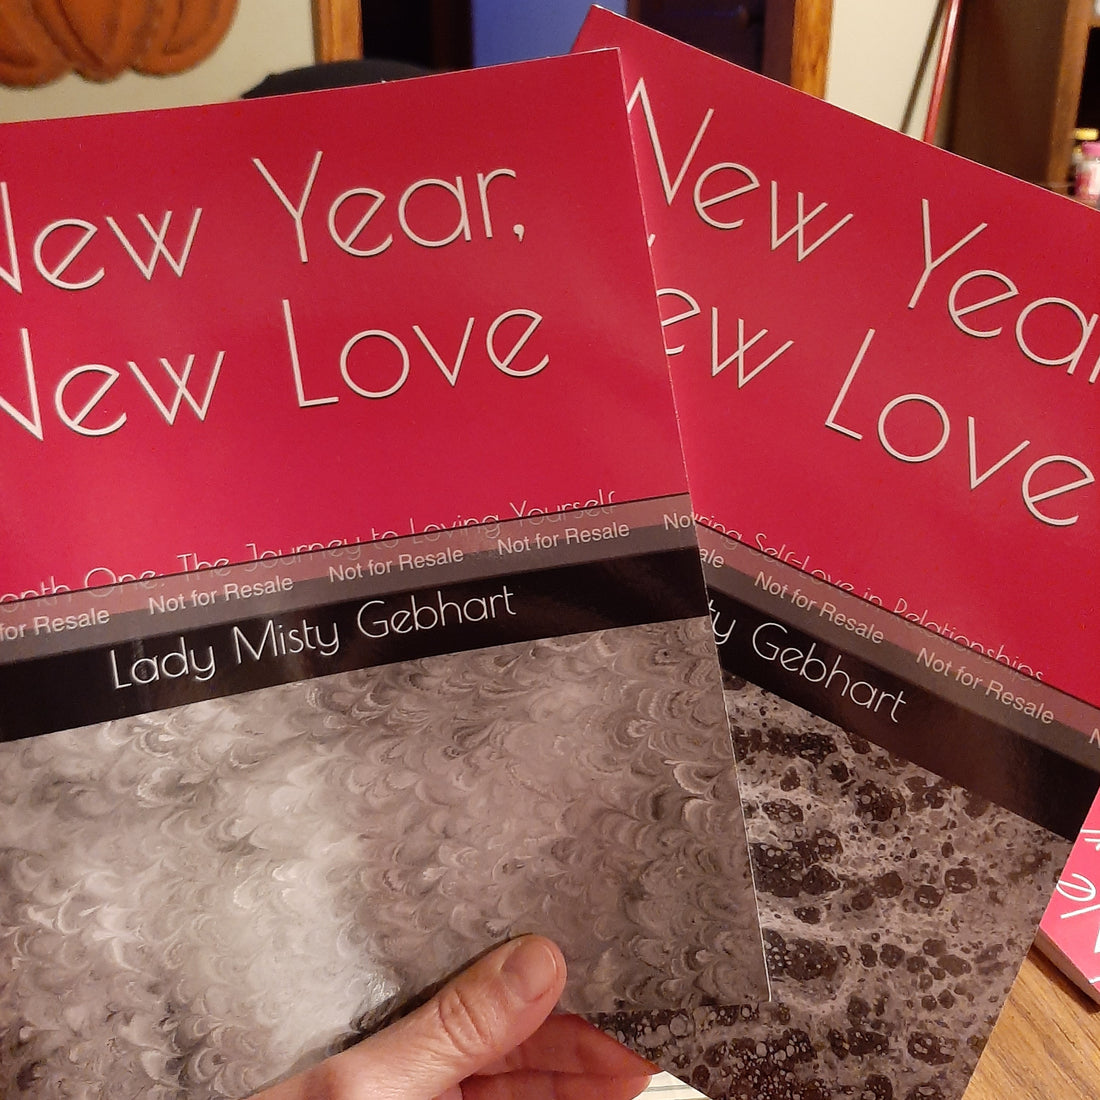 "New Year, New Love" Guided Journals Coming Soon!